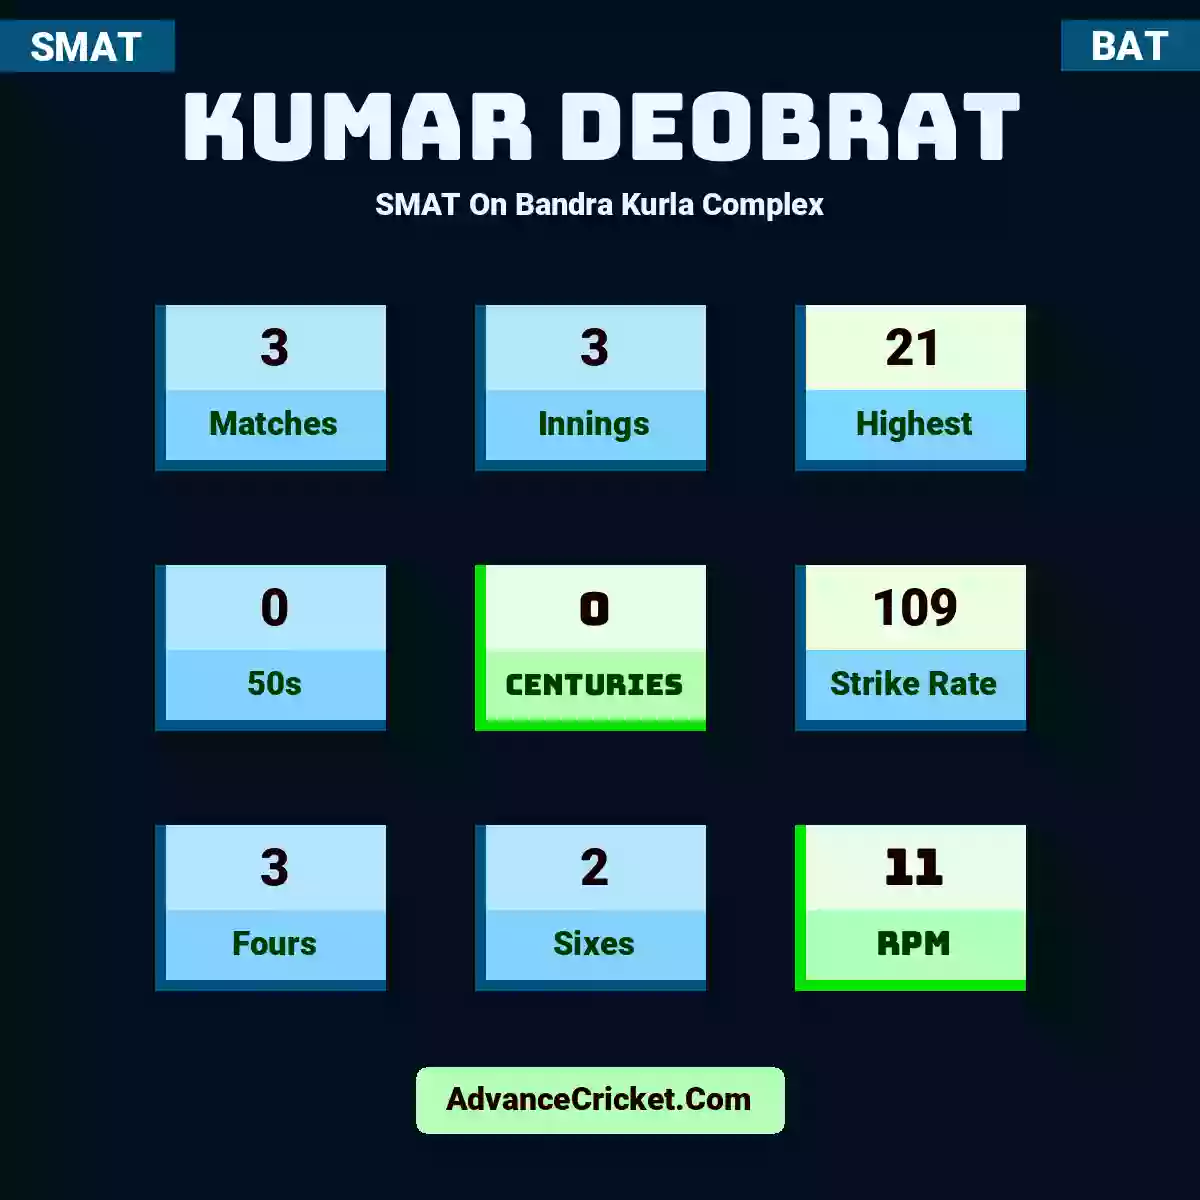 Kumar Deobrat SMAT  On Bandra Kurla Complex, Kumar Deobrat played 3 matches, scored 21 runs as highest, 0 half-centuries, and 0 centuries, with a strike rate of 109. K.Deobrat hit 3 fours and 2 sixes, with an RPM of 11.